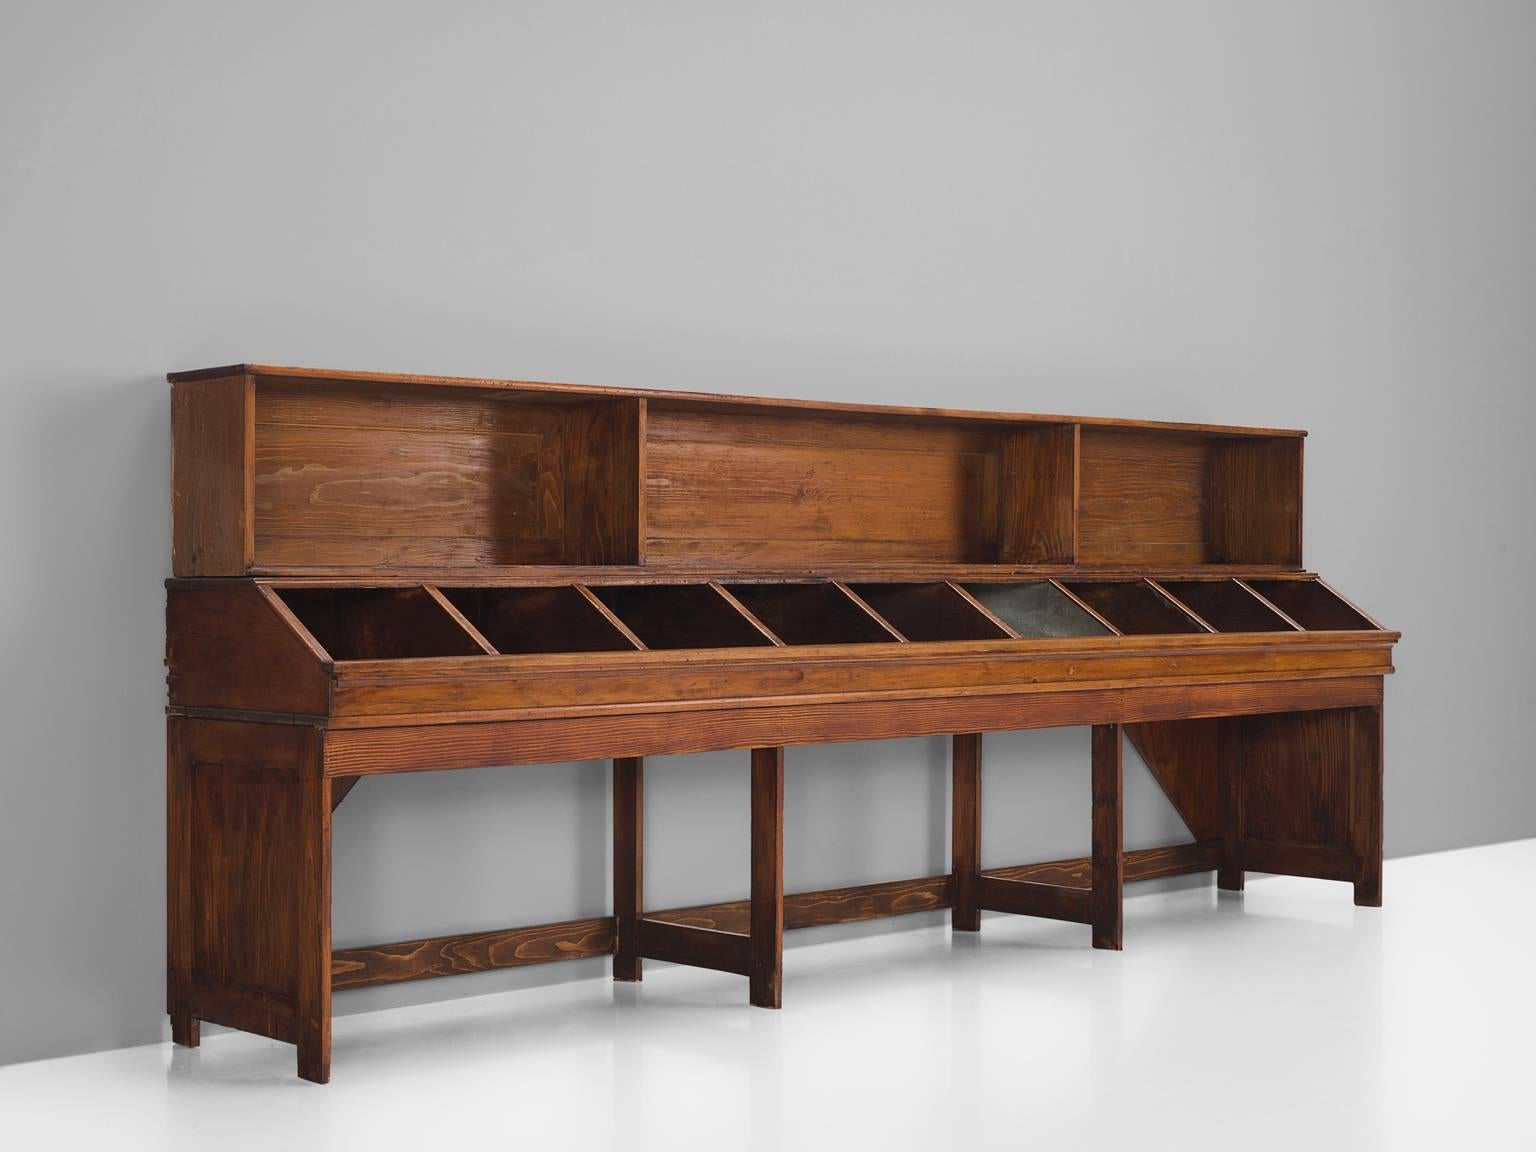 Showcase, wood, Europe, 1940s.

This long and functional showcase is executed in oak. The base of this vitrine is simple and is made with eight straight legs. The cabinet has nine small storage spaces and on top there are three large cabinets of